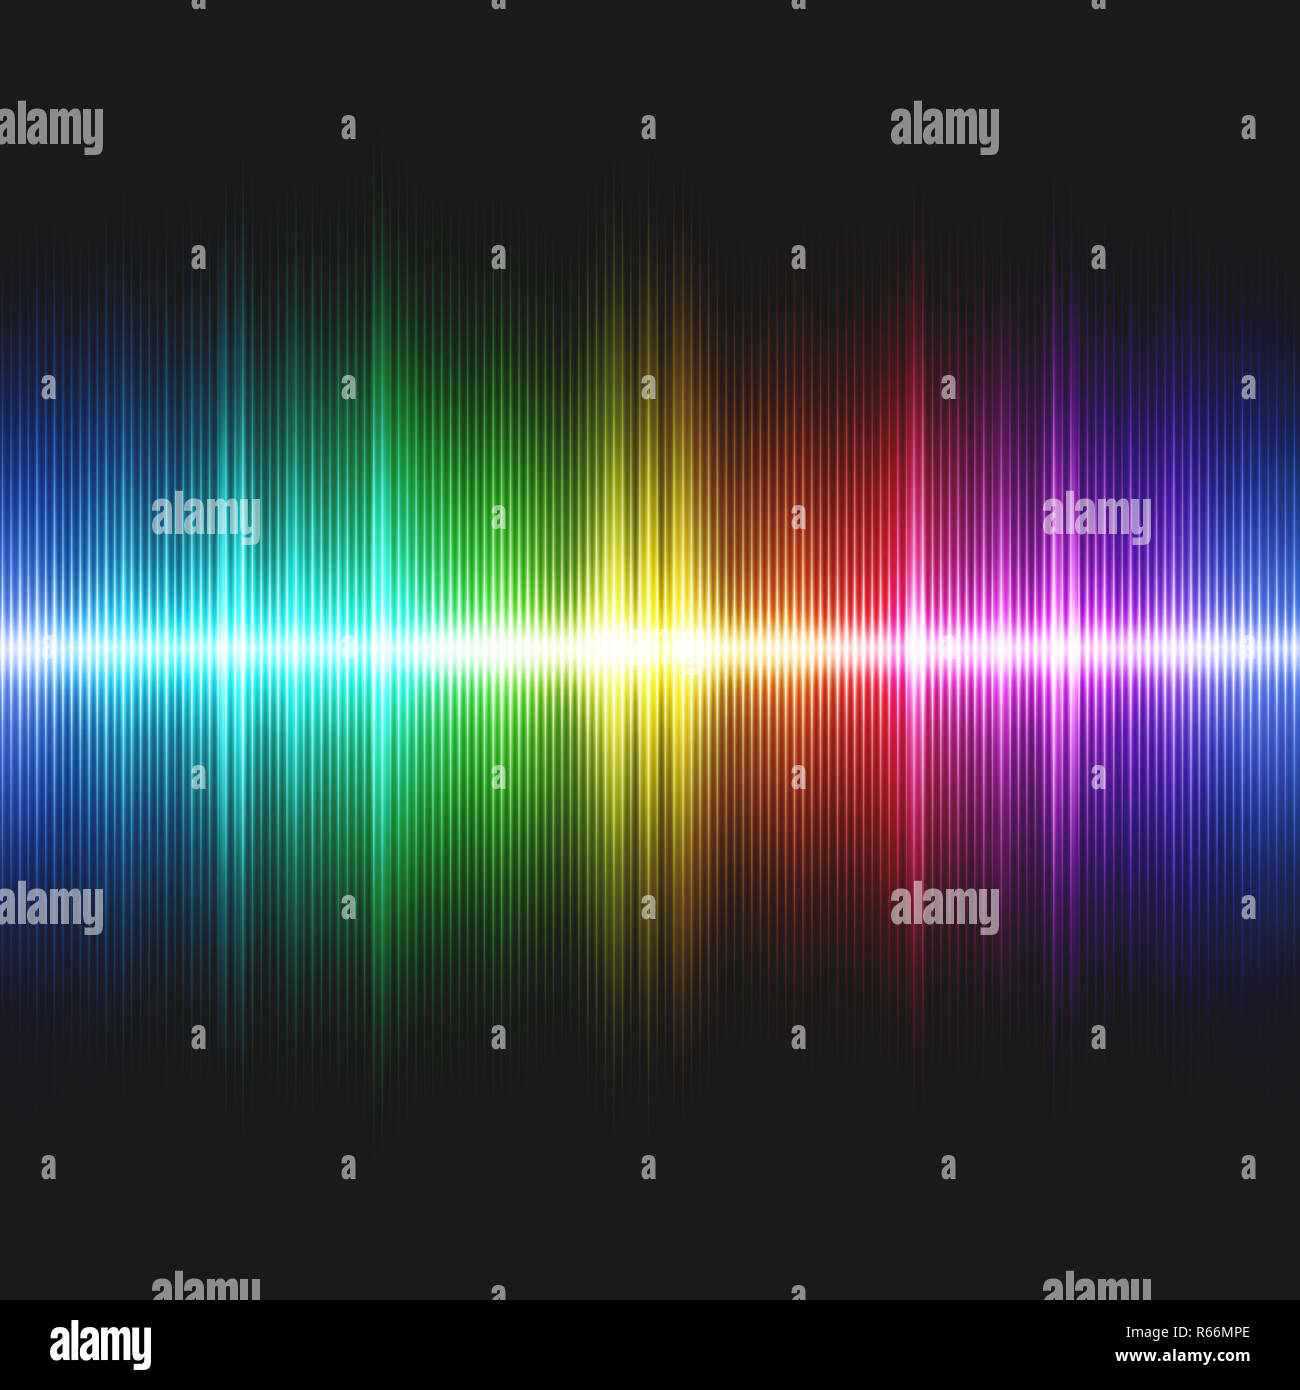 Seamless Colorful Sound Waves Stock Photo